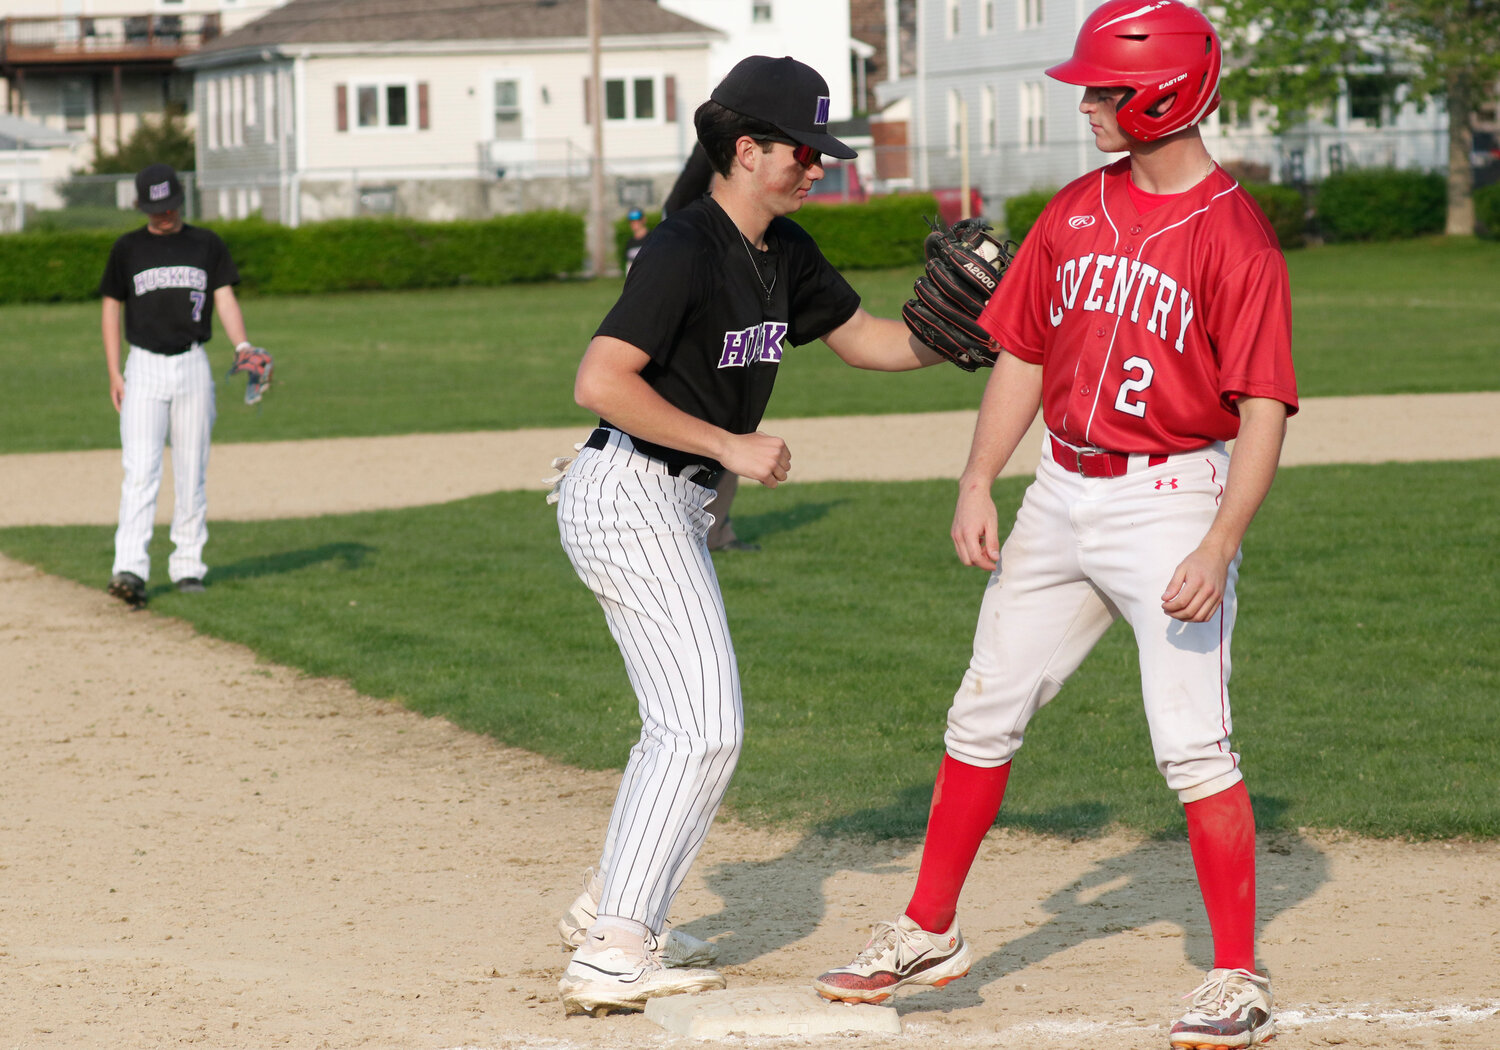 Rocco Ferrolito slaps a late tag on a Coventry runner getting back to third base.